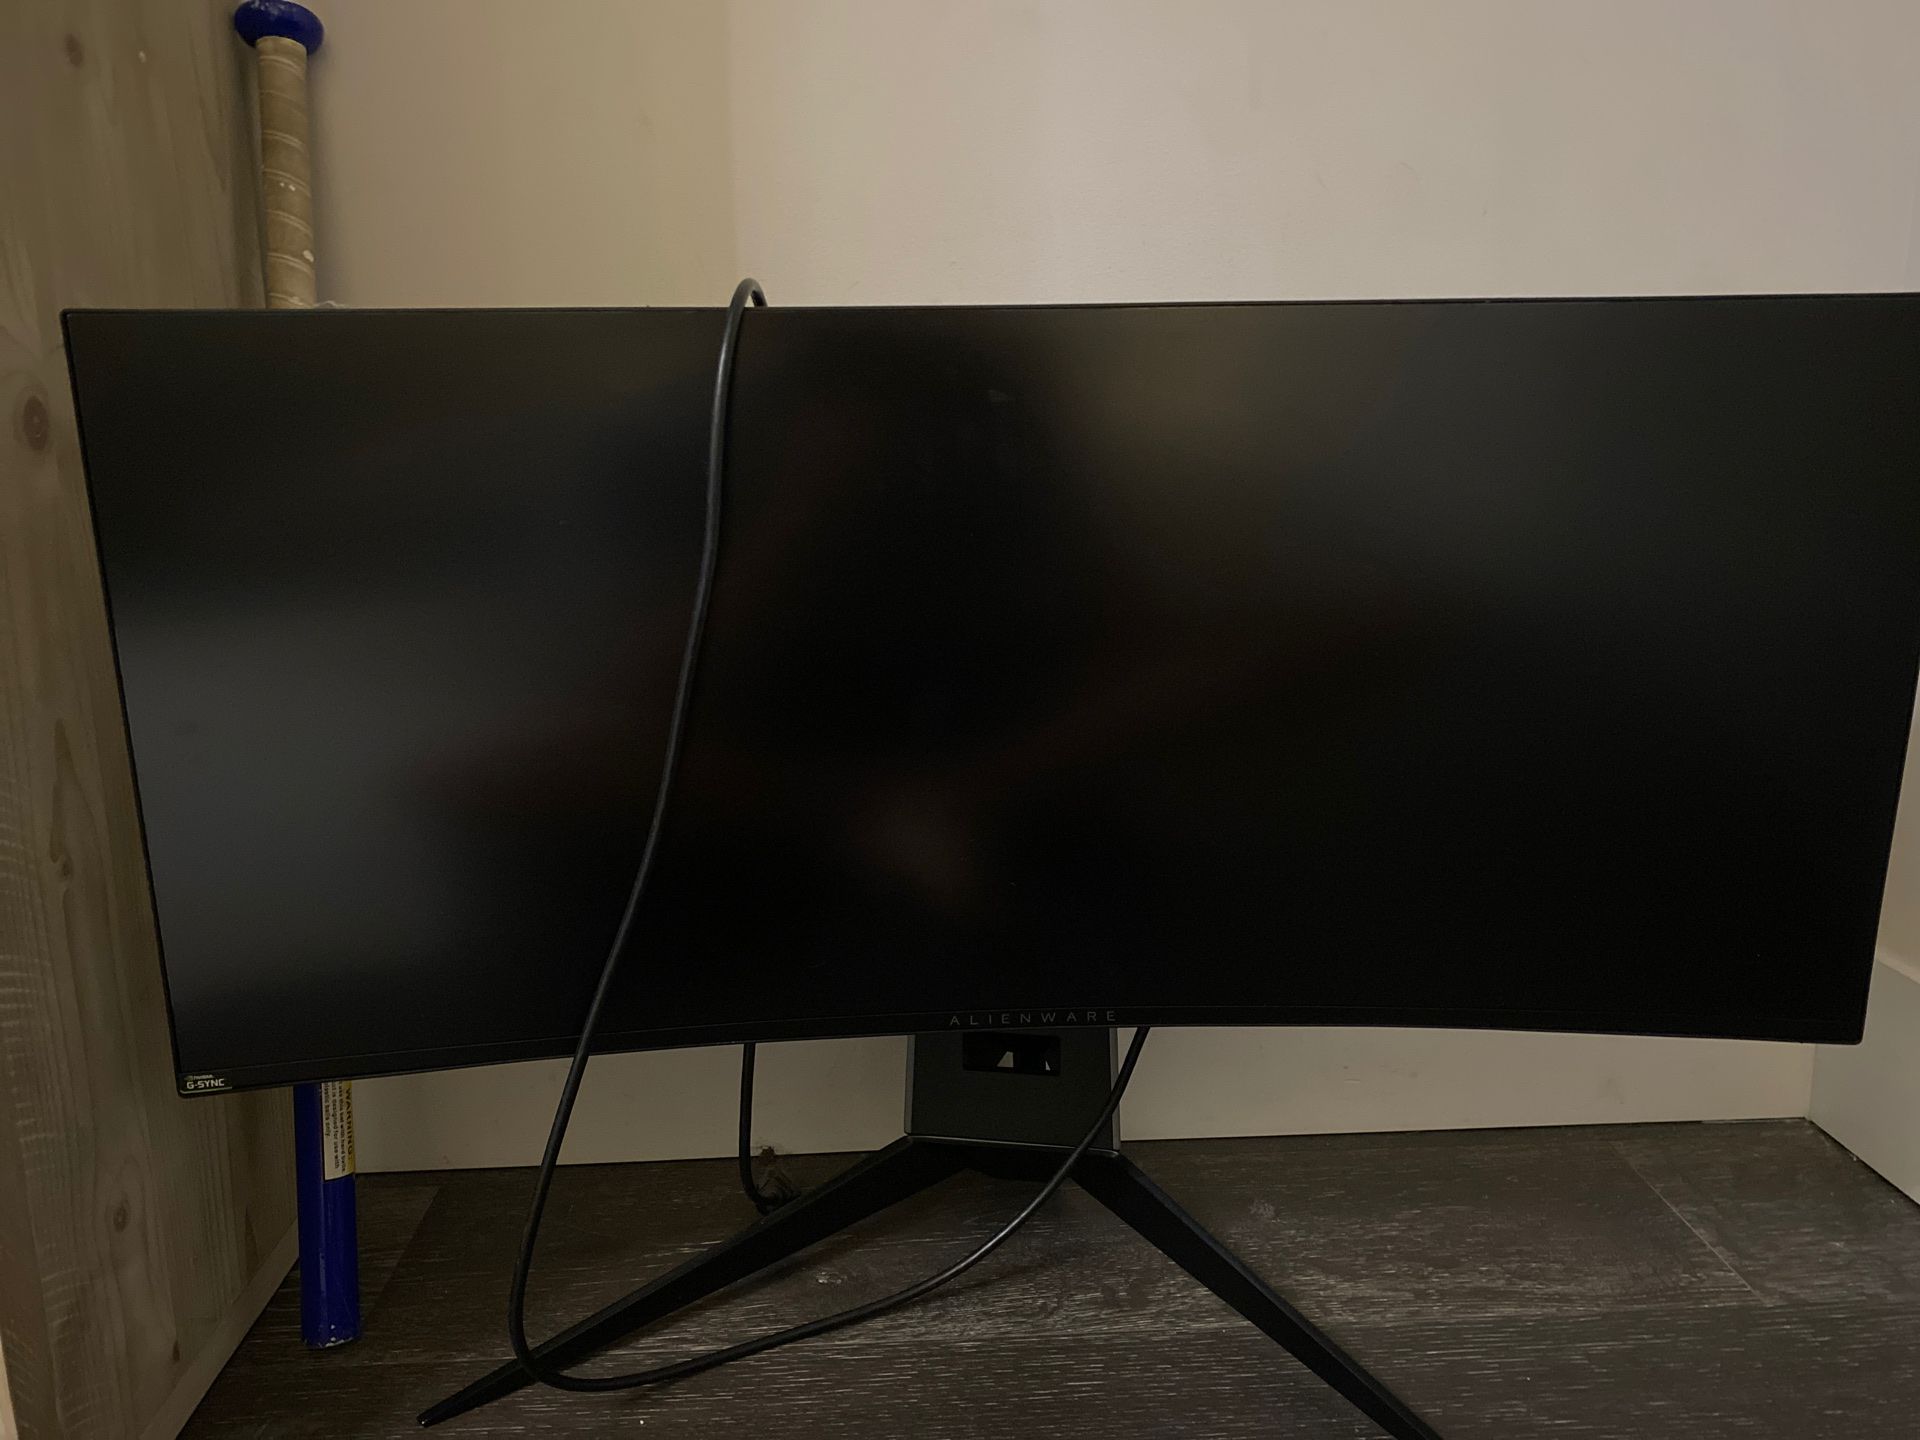 120 hz Alienware 34 inch curved Monitor: This monitor cost around 1200 dollars brand new.